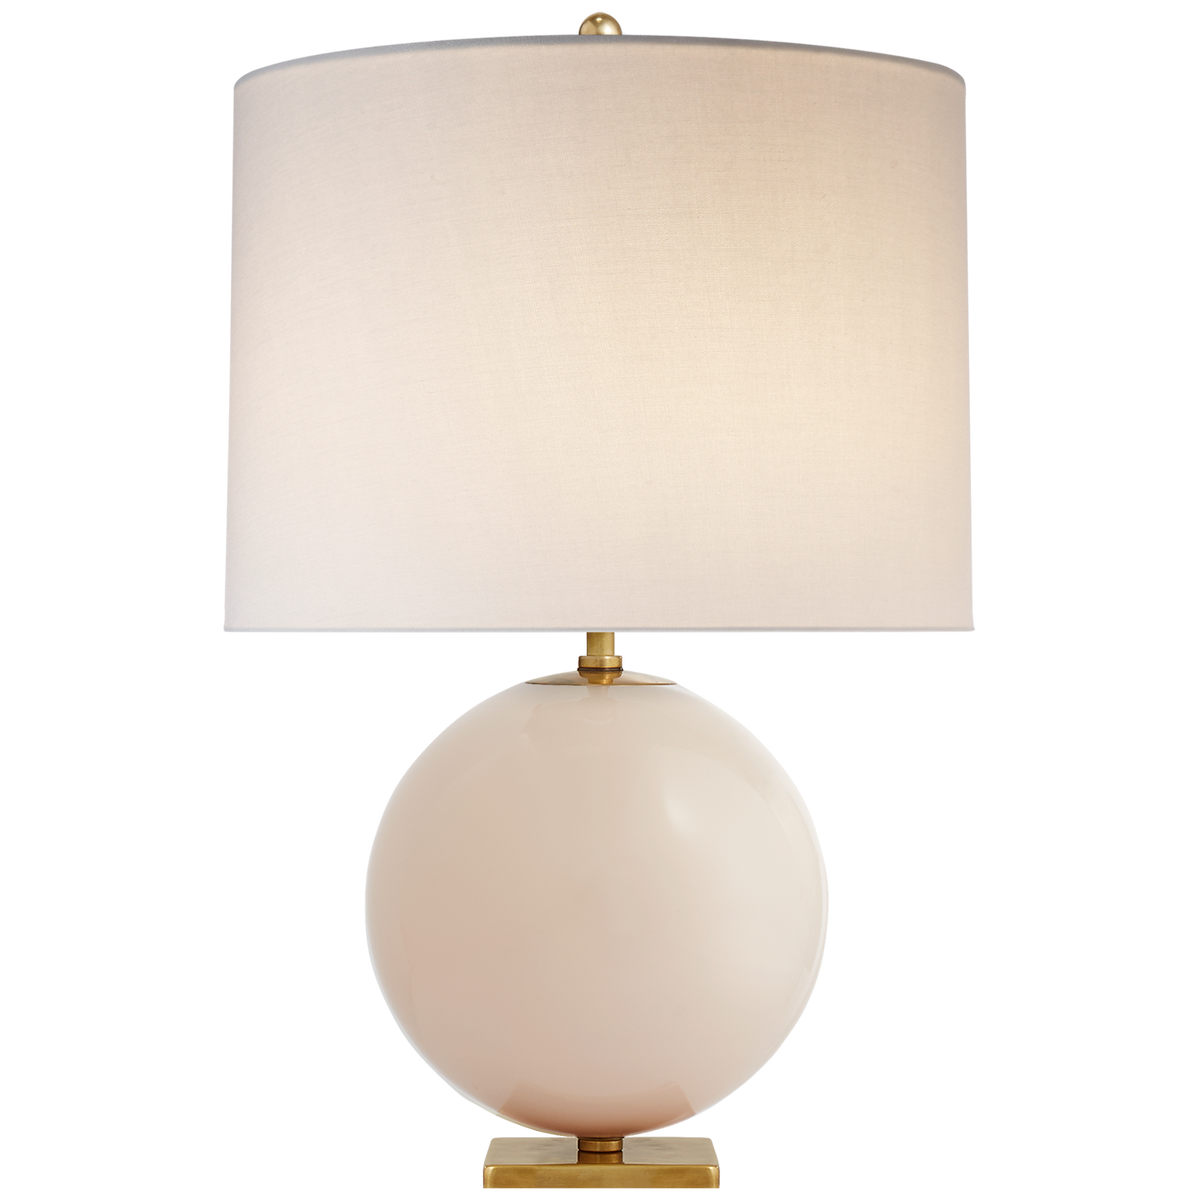 Elsie Table Lamp - Blush Painted Glass with Cream Linen Shade